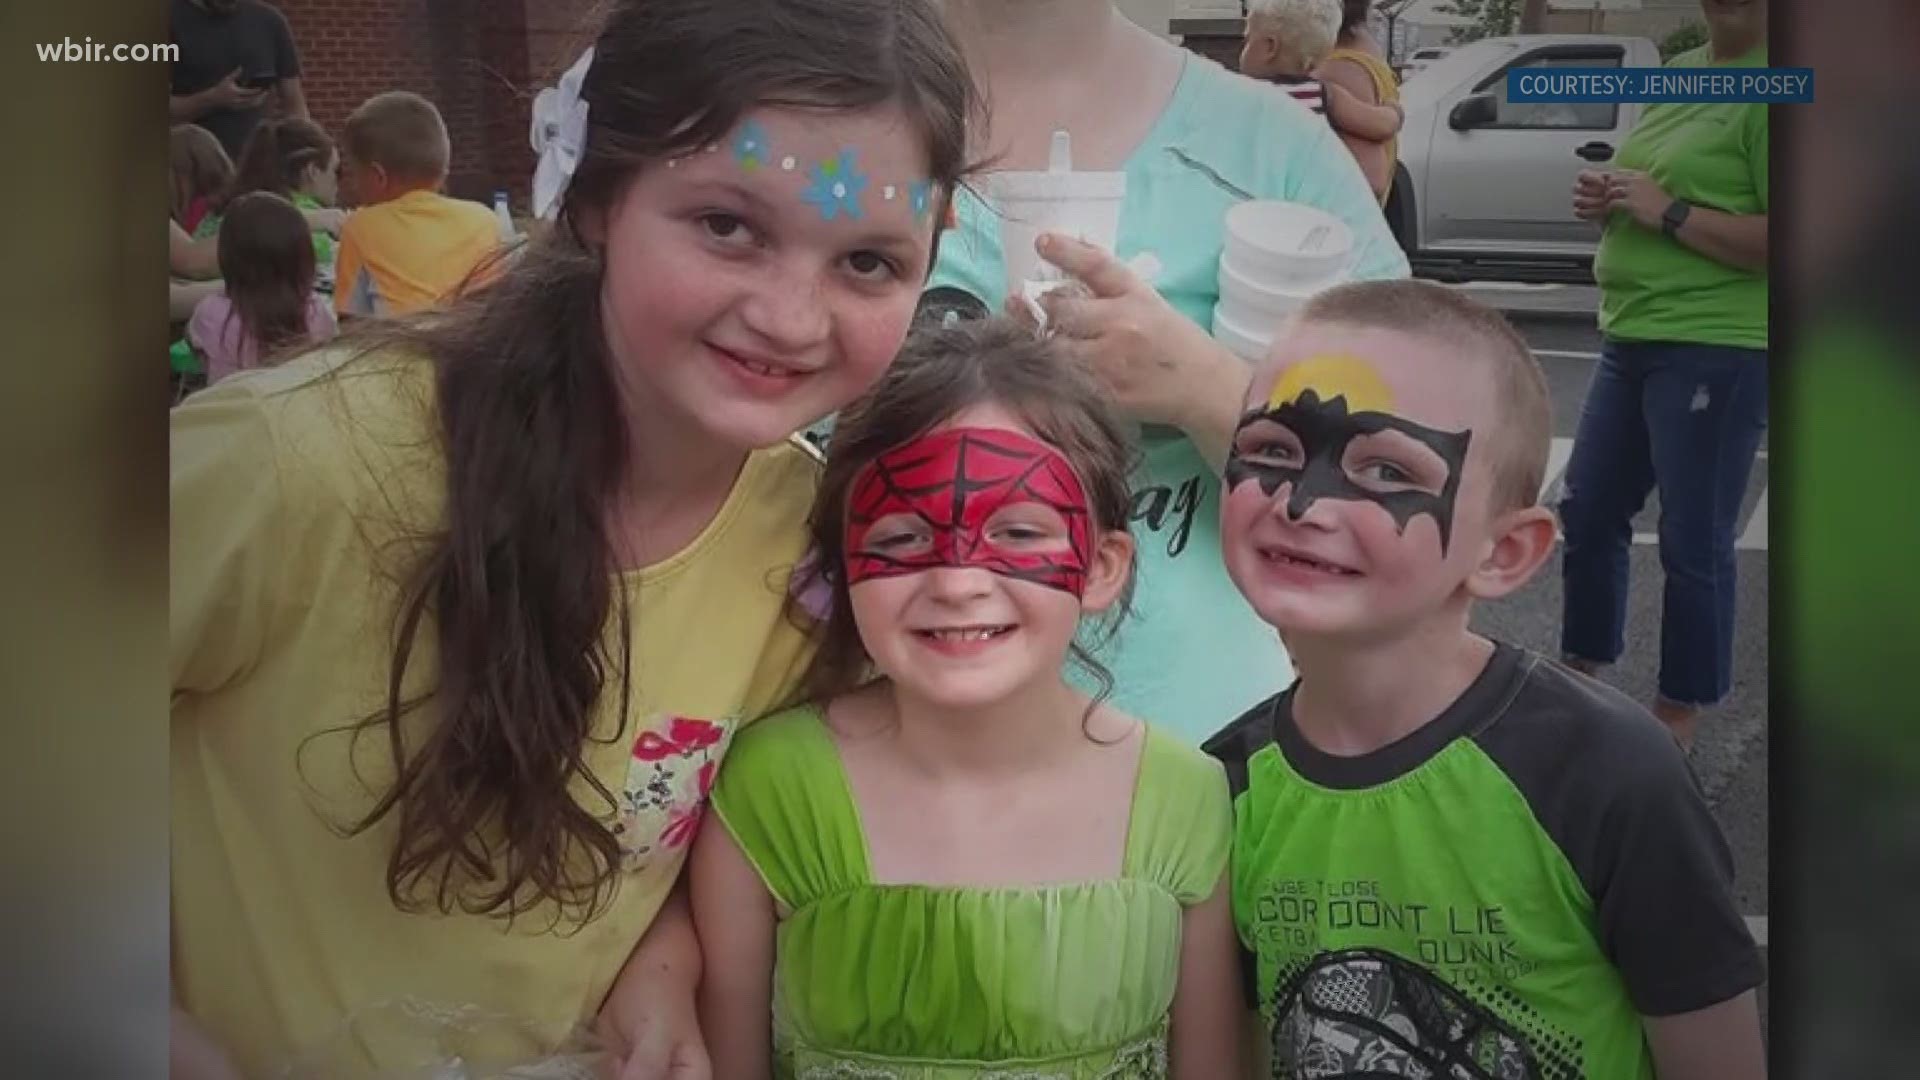 A trailer fire in Bell County, Kentucky took the lives of three children and their grandmother.
Their mother says she lost half her heart that day.